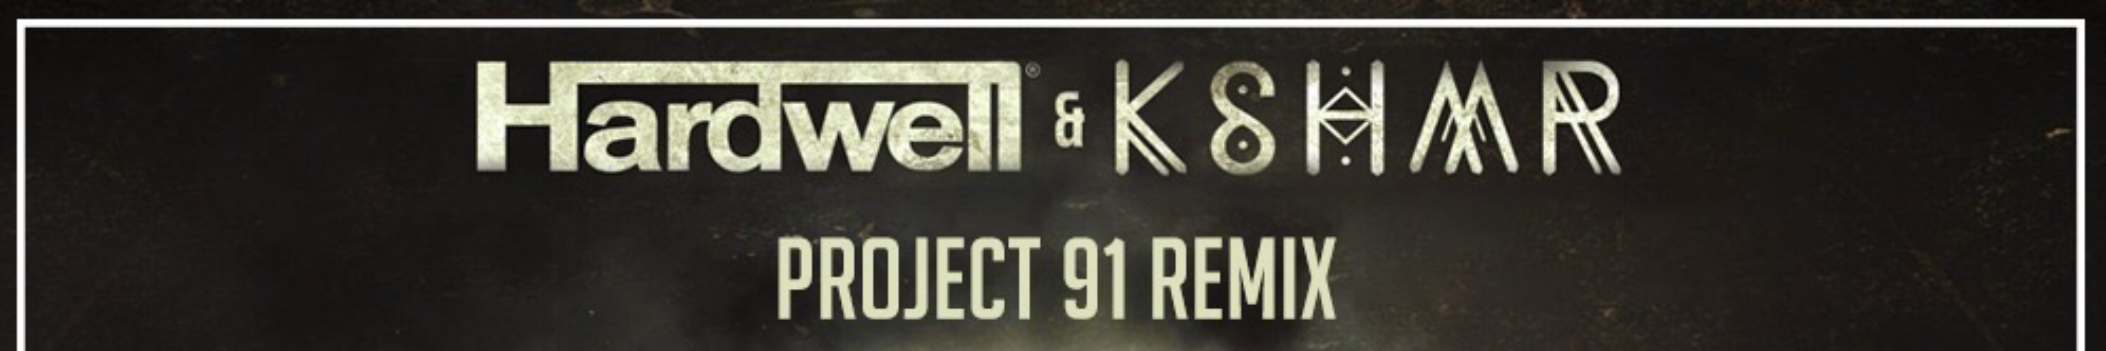 Project91